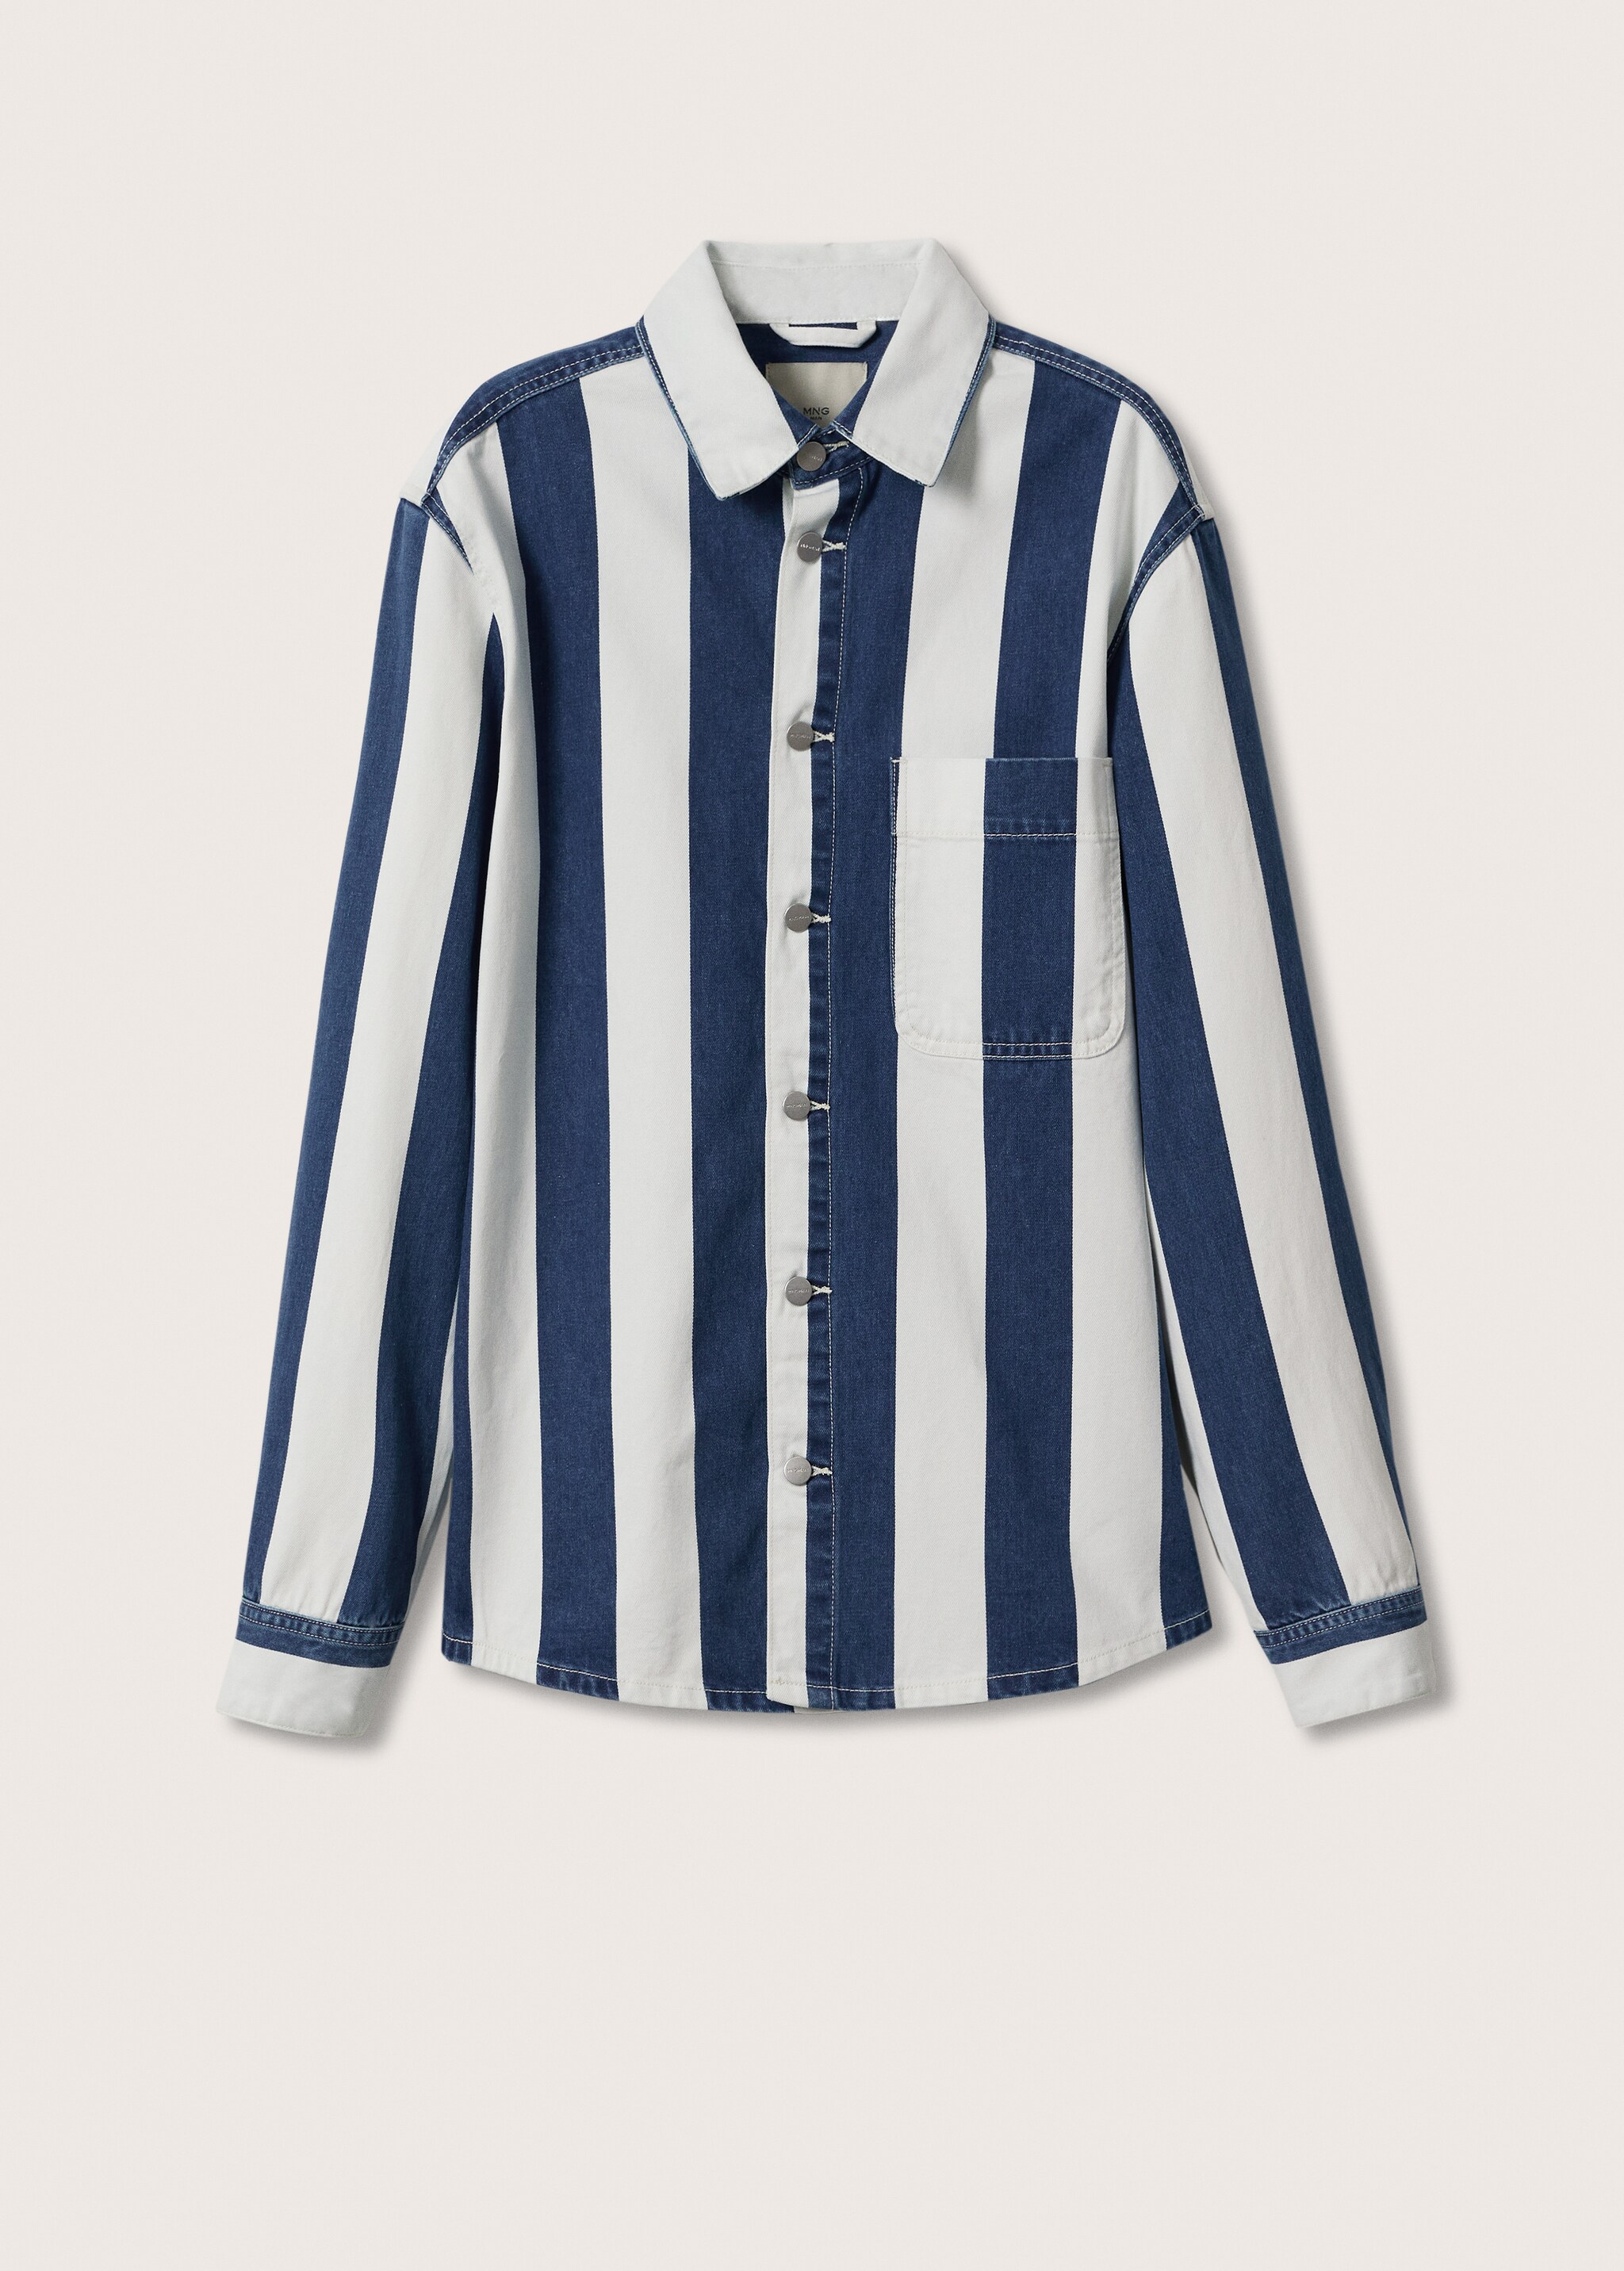 Striped denim shirt - Article without model